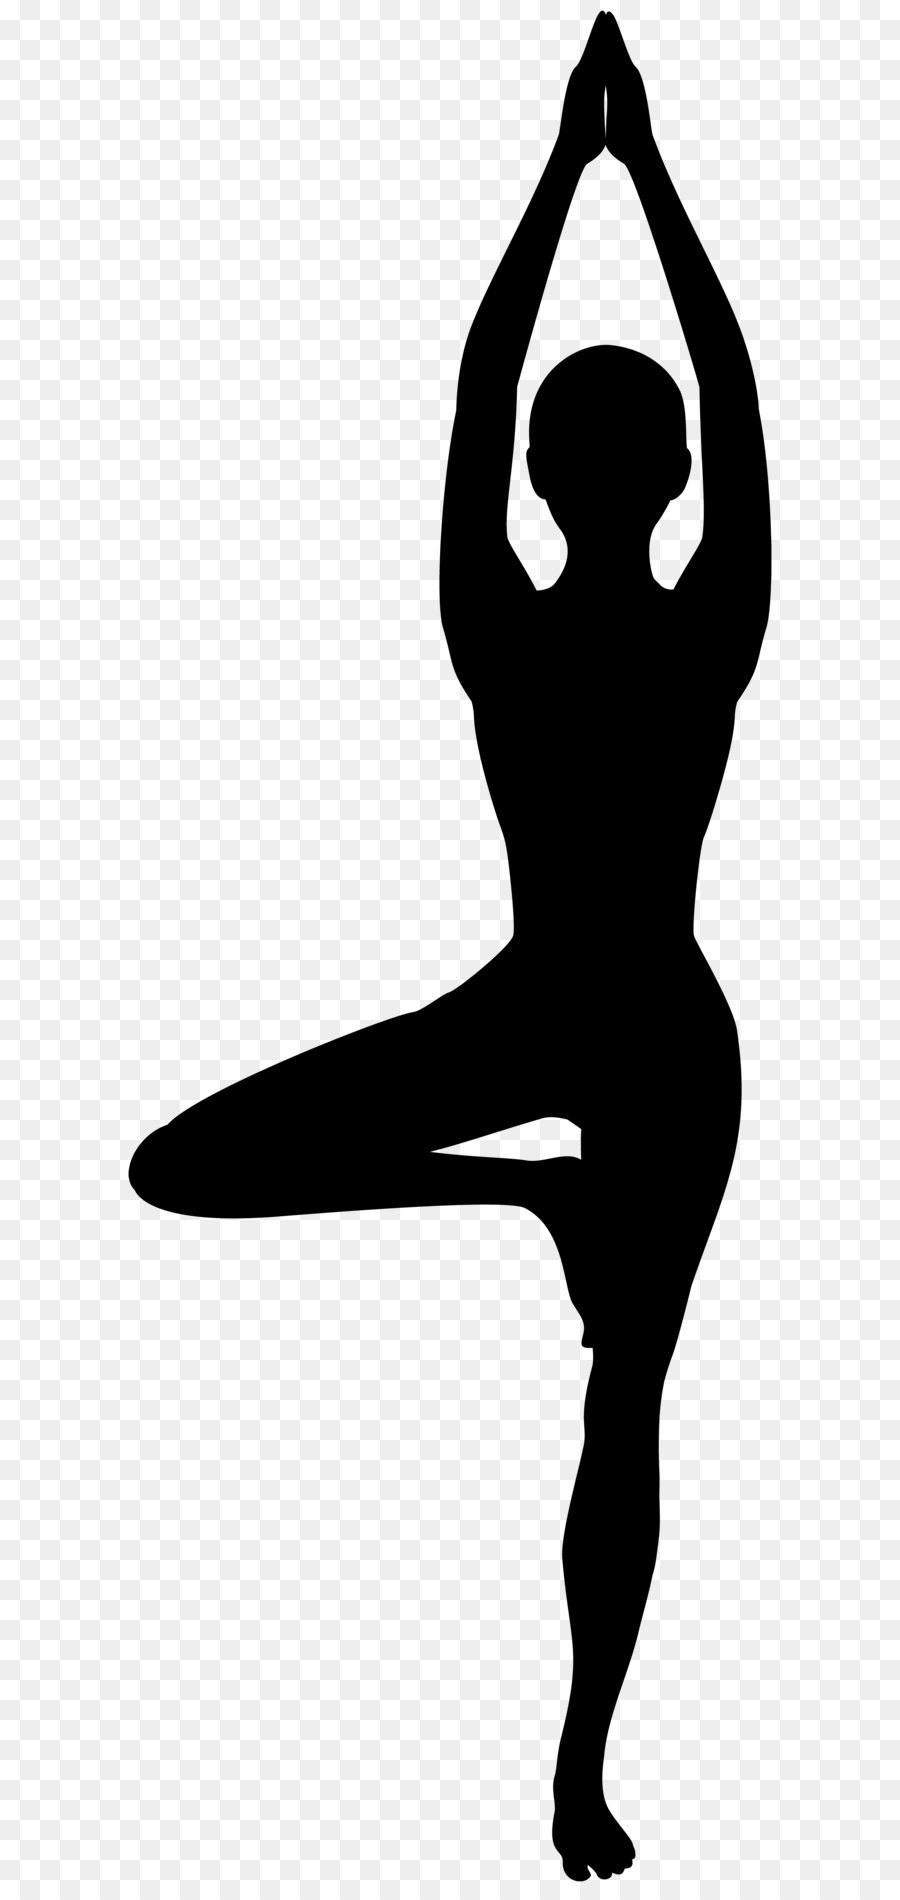 Yoga Silhouette Pixabay - Yoga Silhouette PNG Clip Art png download - 2749*8000 - Free Transparent Yoga png Download.